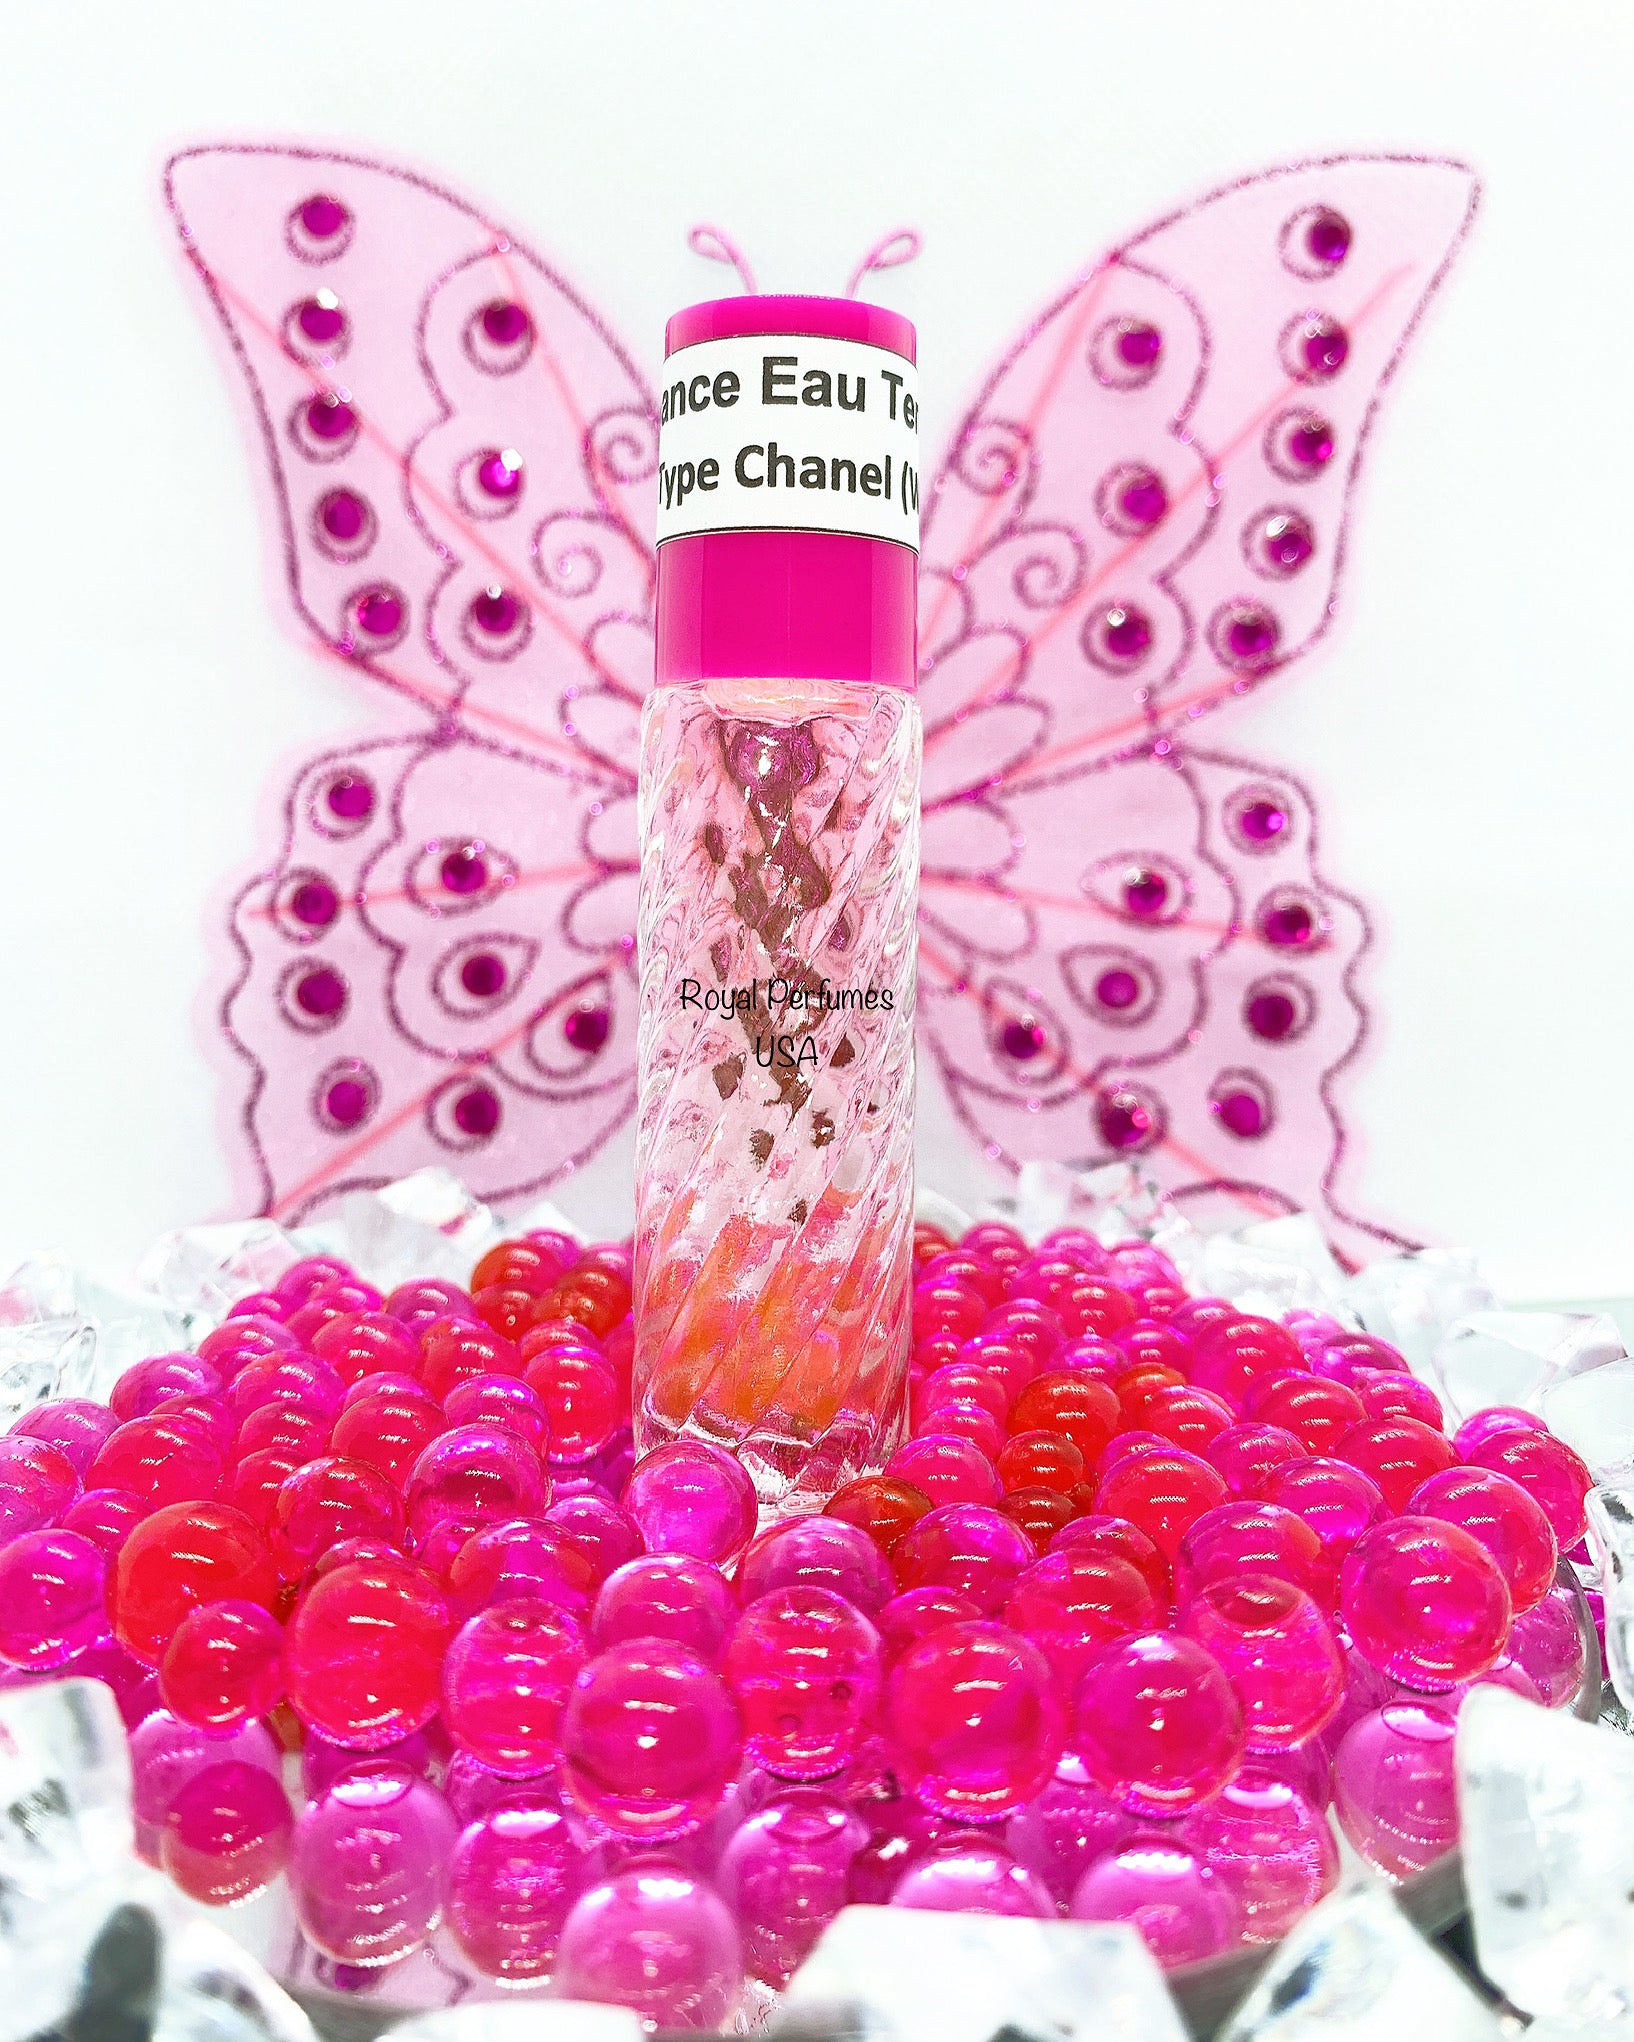 Royal Perfume's version of Chance Eau Tendre Type 100% Natural